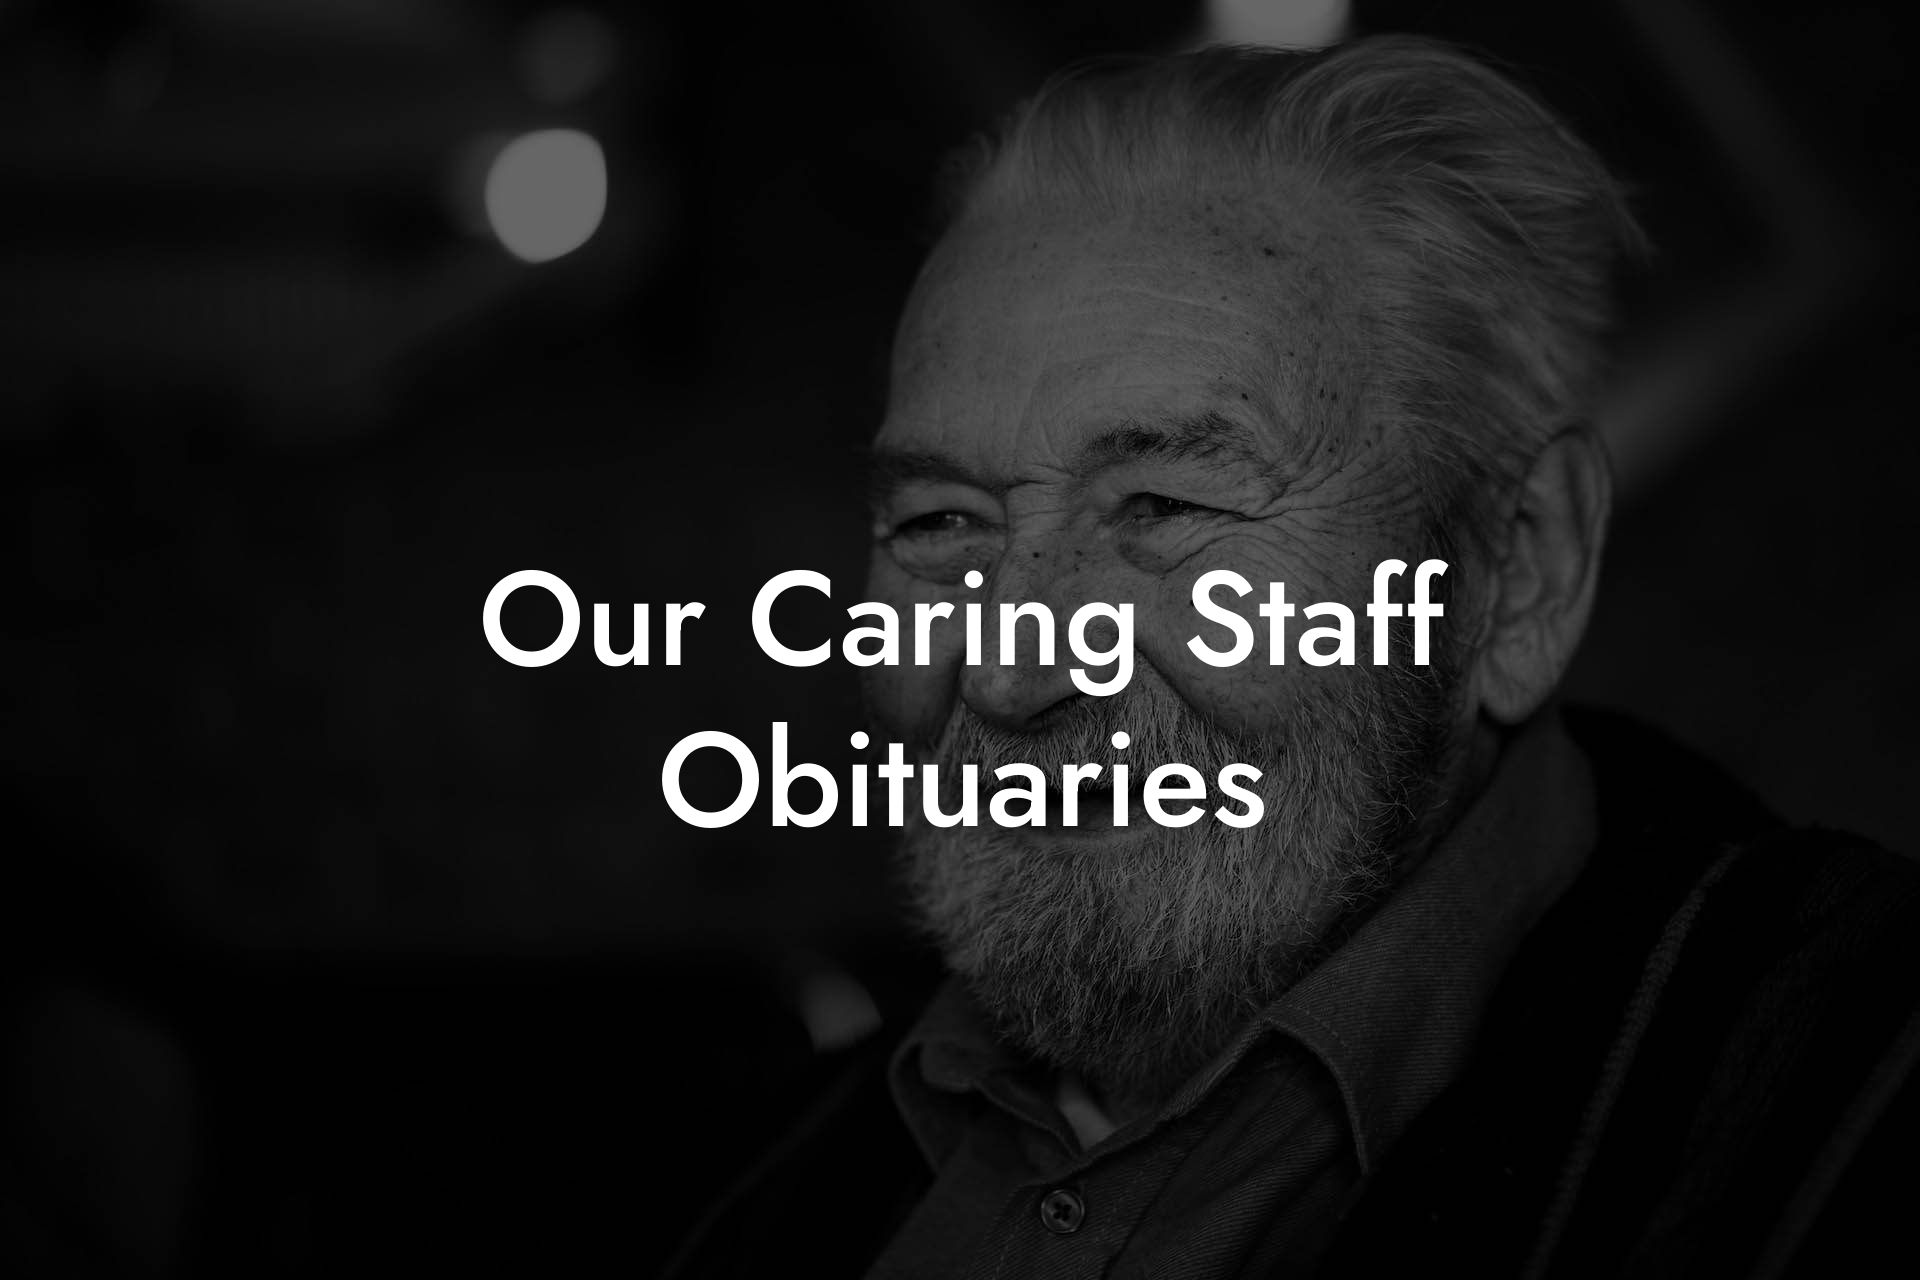 Our Caring Staff Obituaries